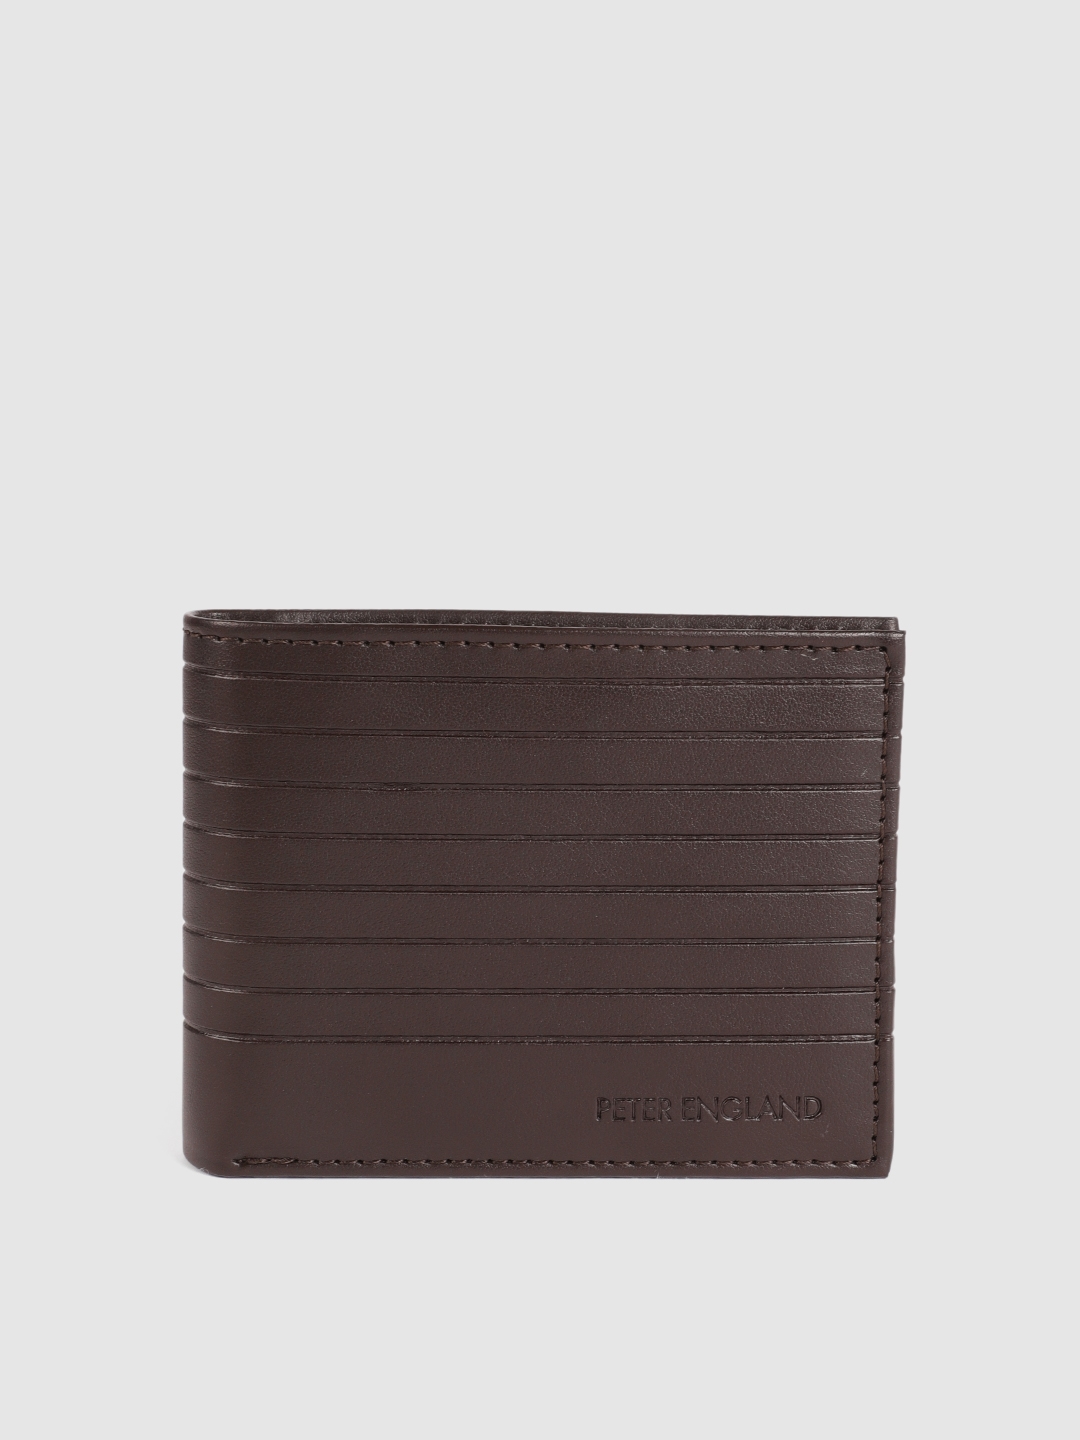 Peter England Men Brown Textured Leather Two Fold Wallet